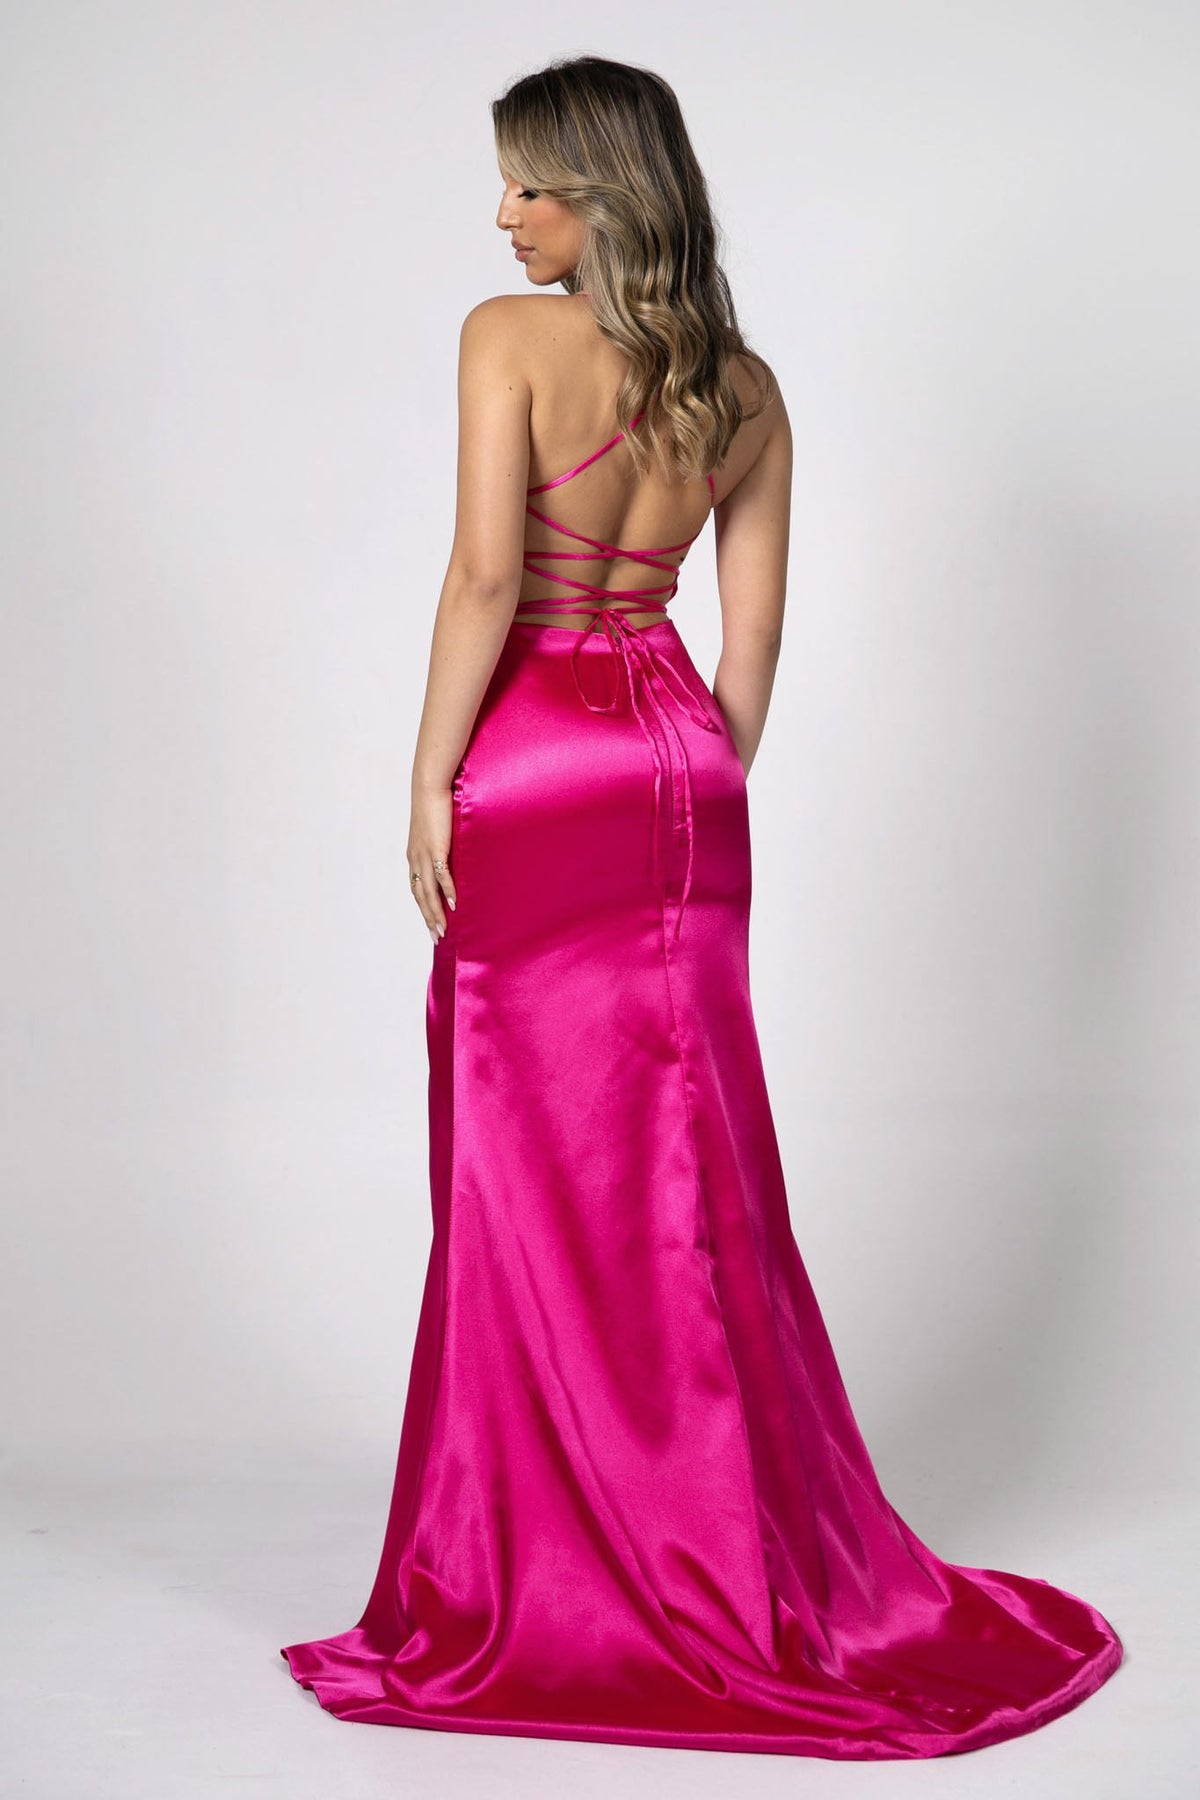 Lace Up Open Back Design of Bright Pink Satin Evening Floor Length Gown